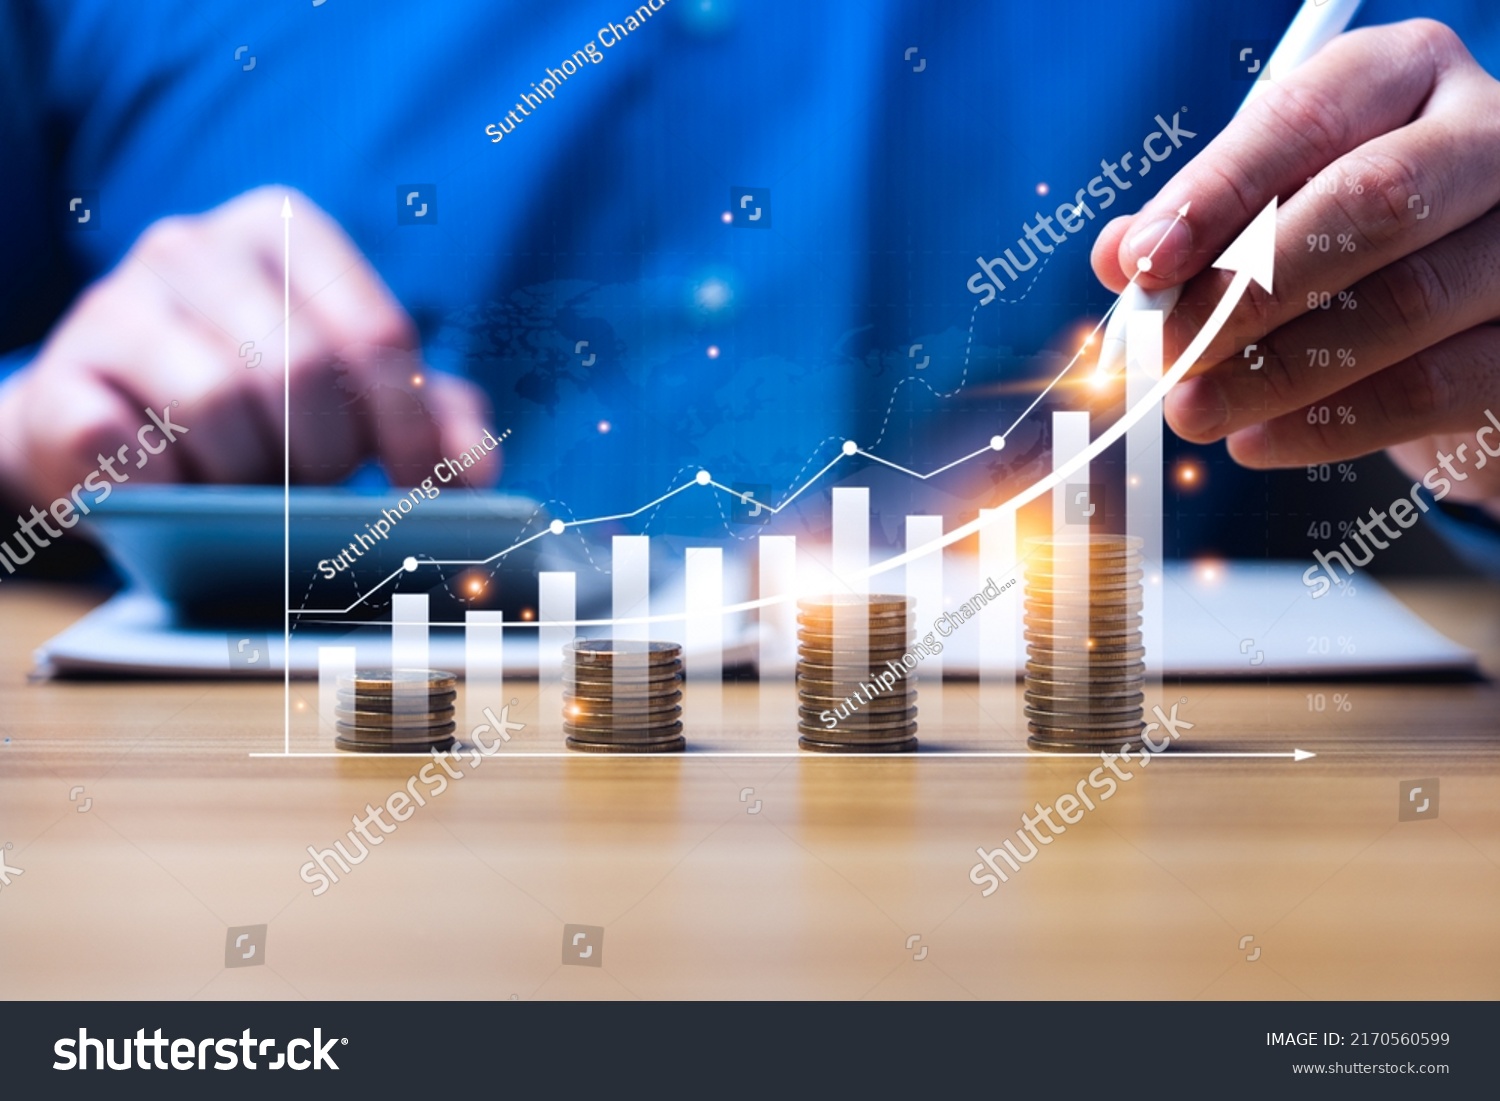 financial business growth concept. businessperson calculate income and profit on investments and an increase in the indicators of positive growth, with virtual holographic chart graph. rich, coin #2170560599